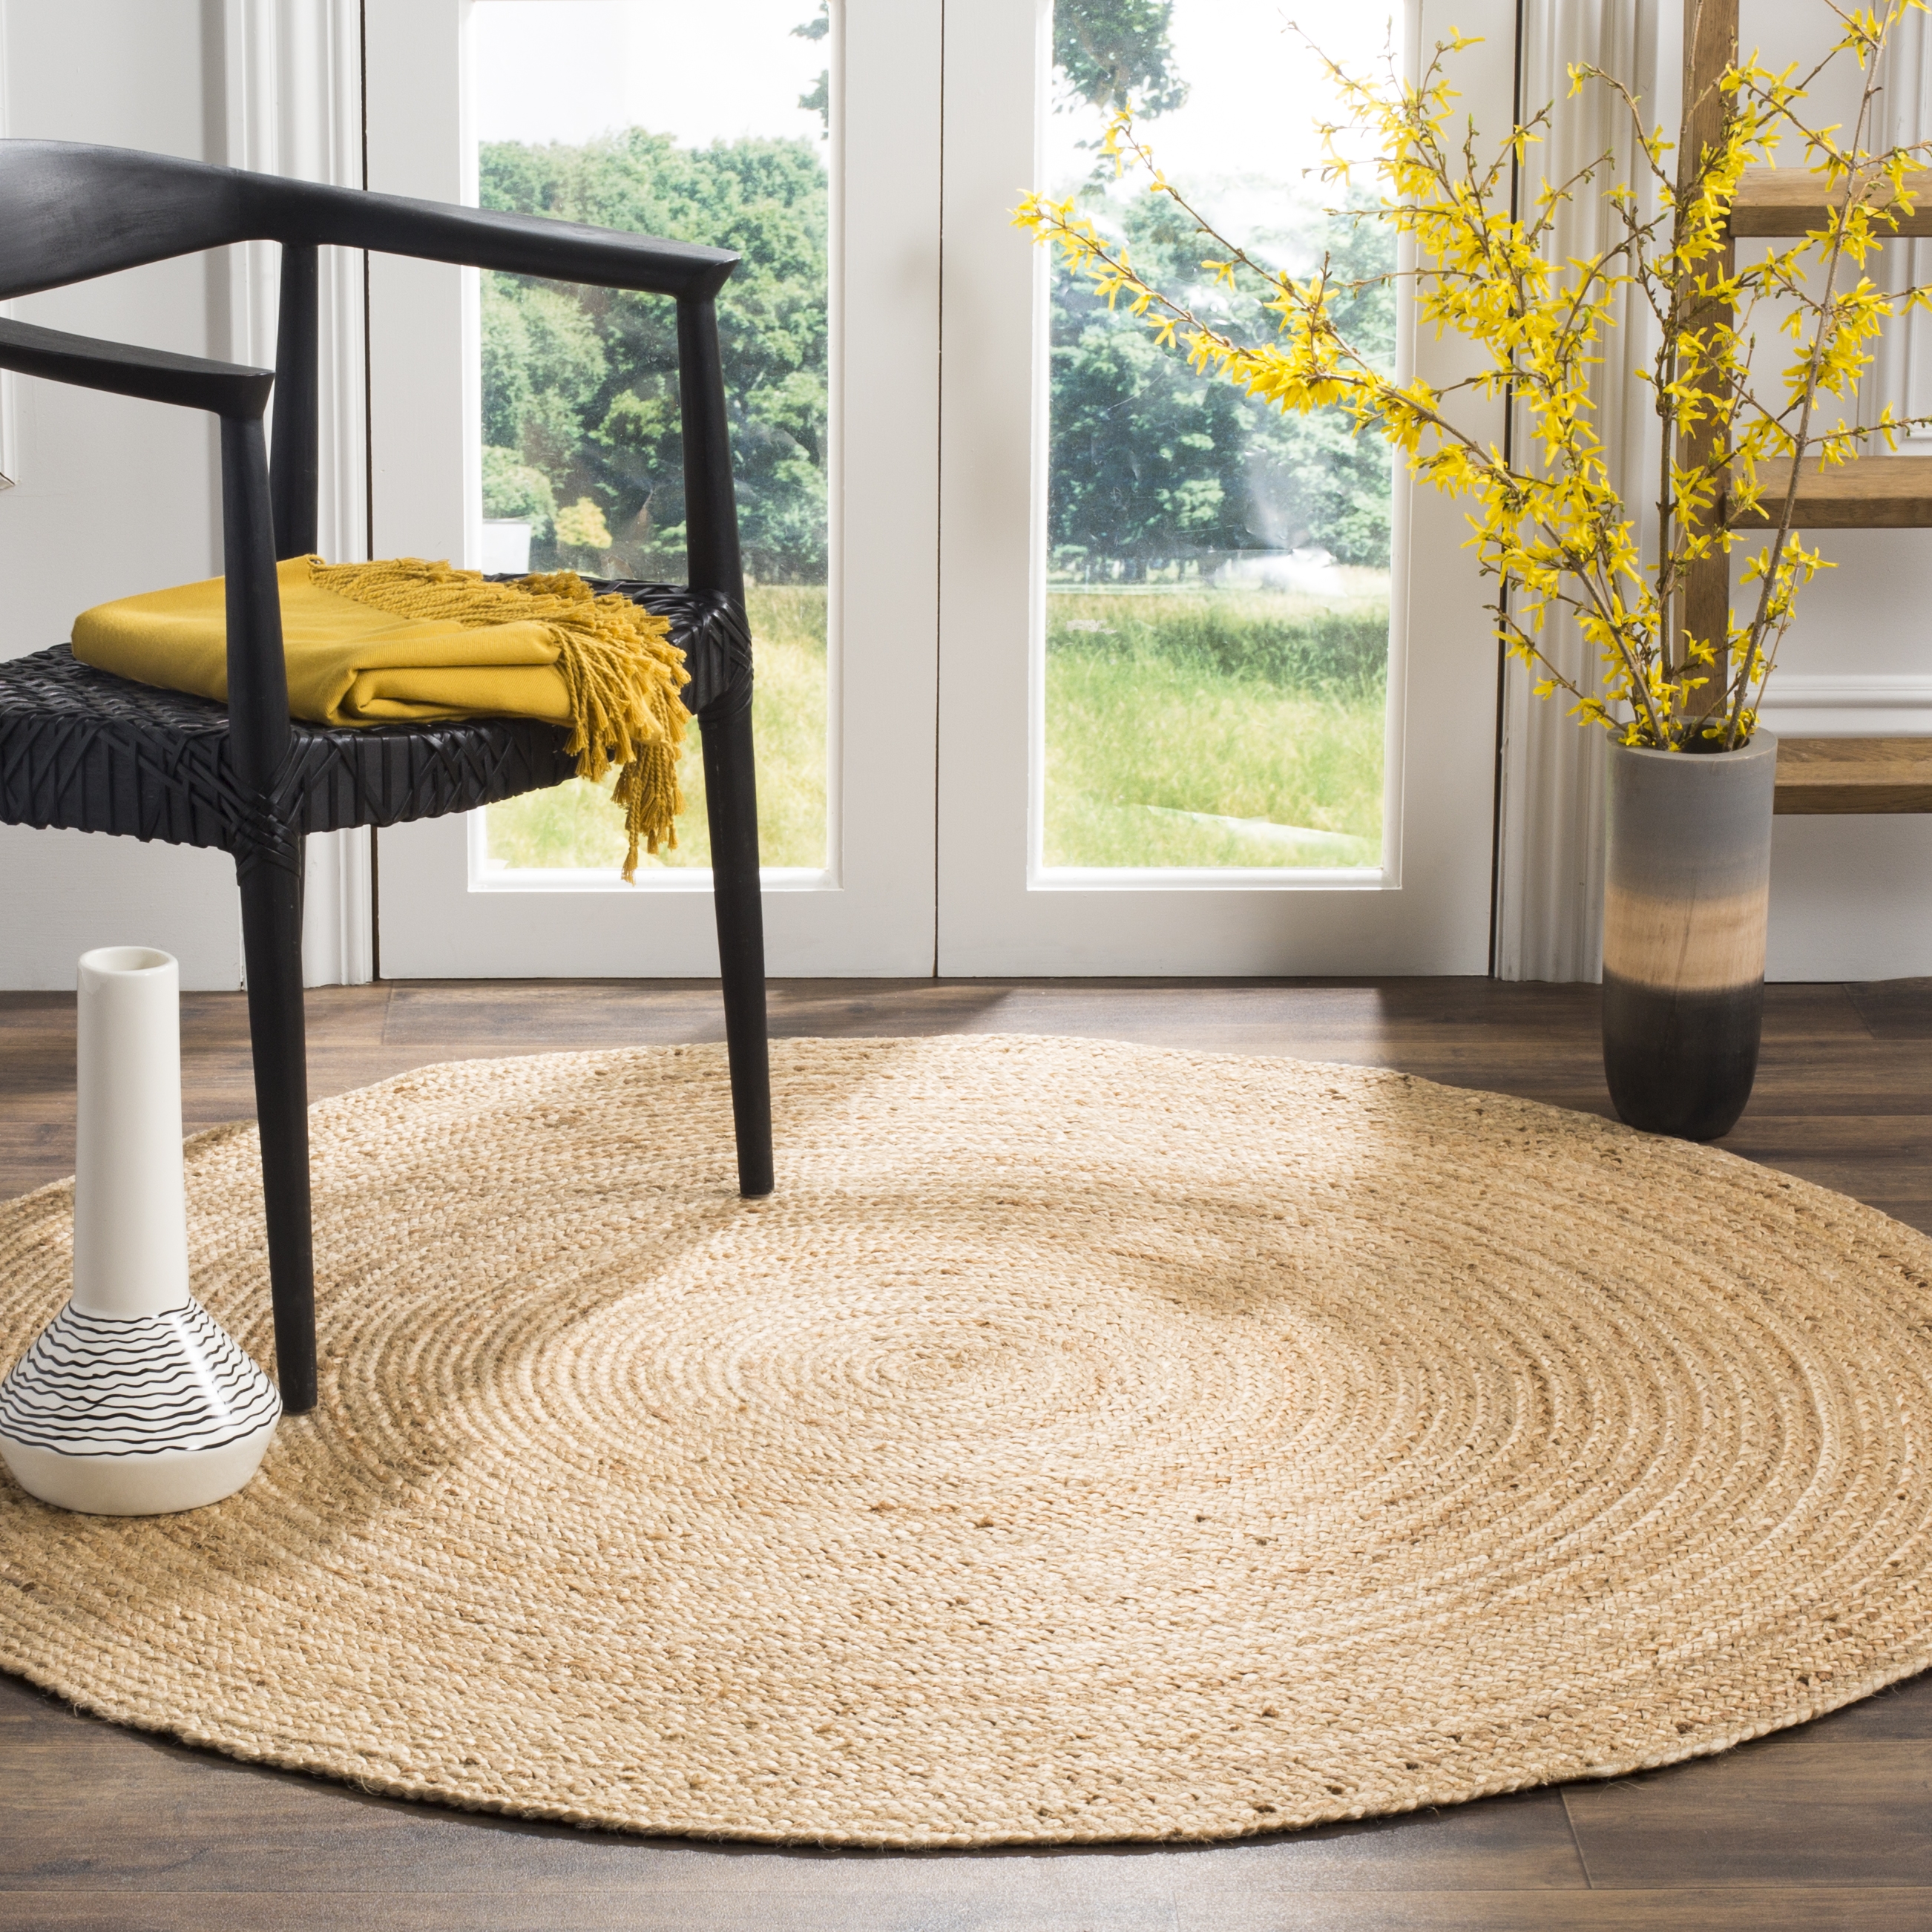 Safavieh Hand Woven Area Rug, NF801N, Natural/Natural,  8' X 8' Round - Image 1